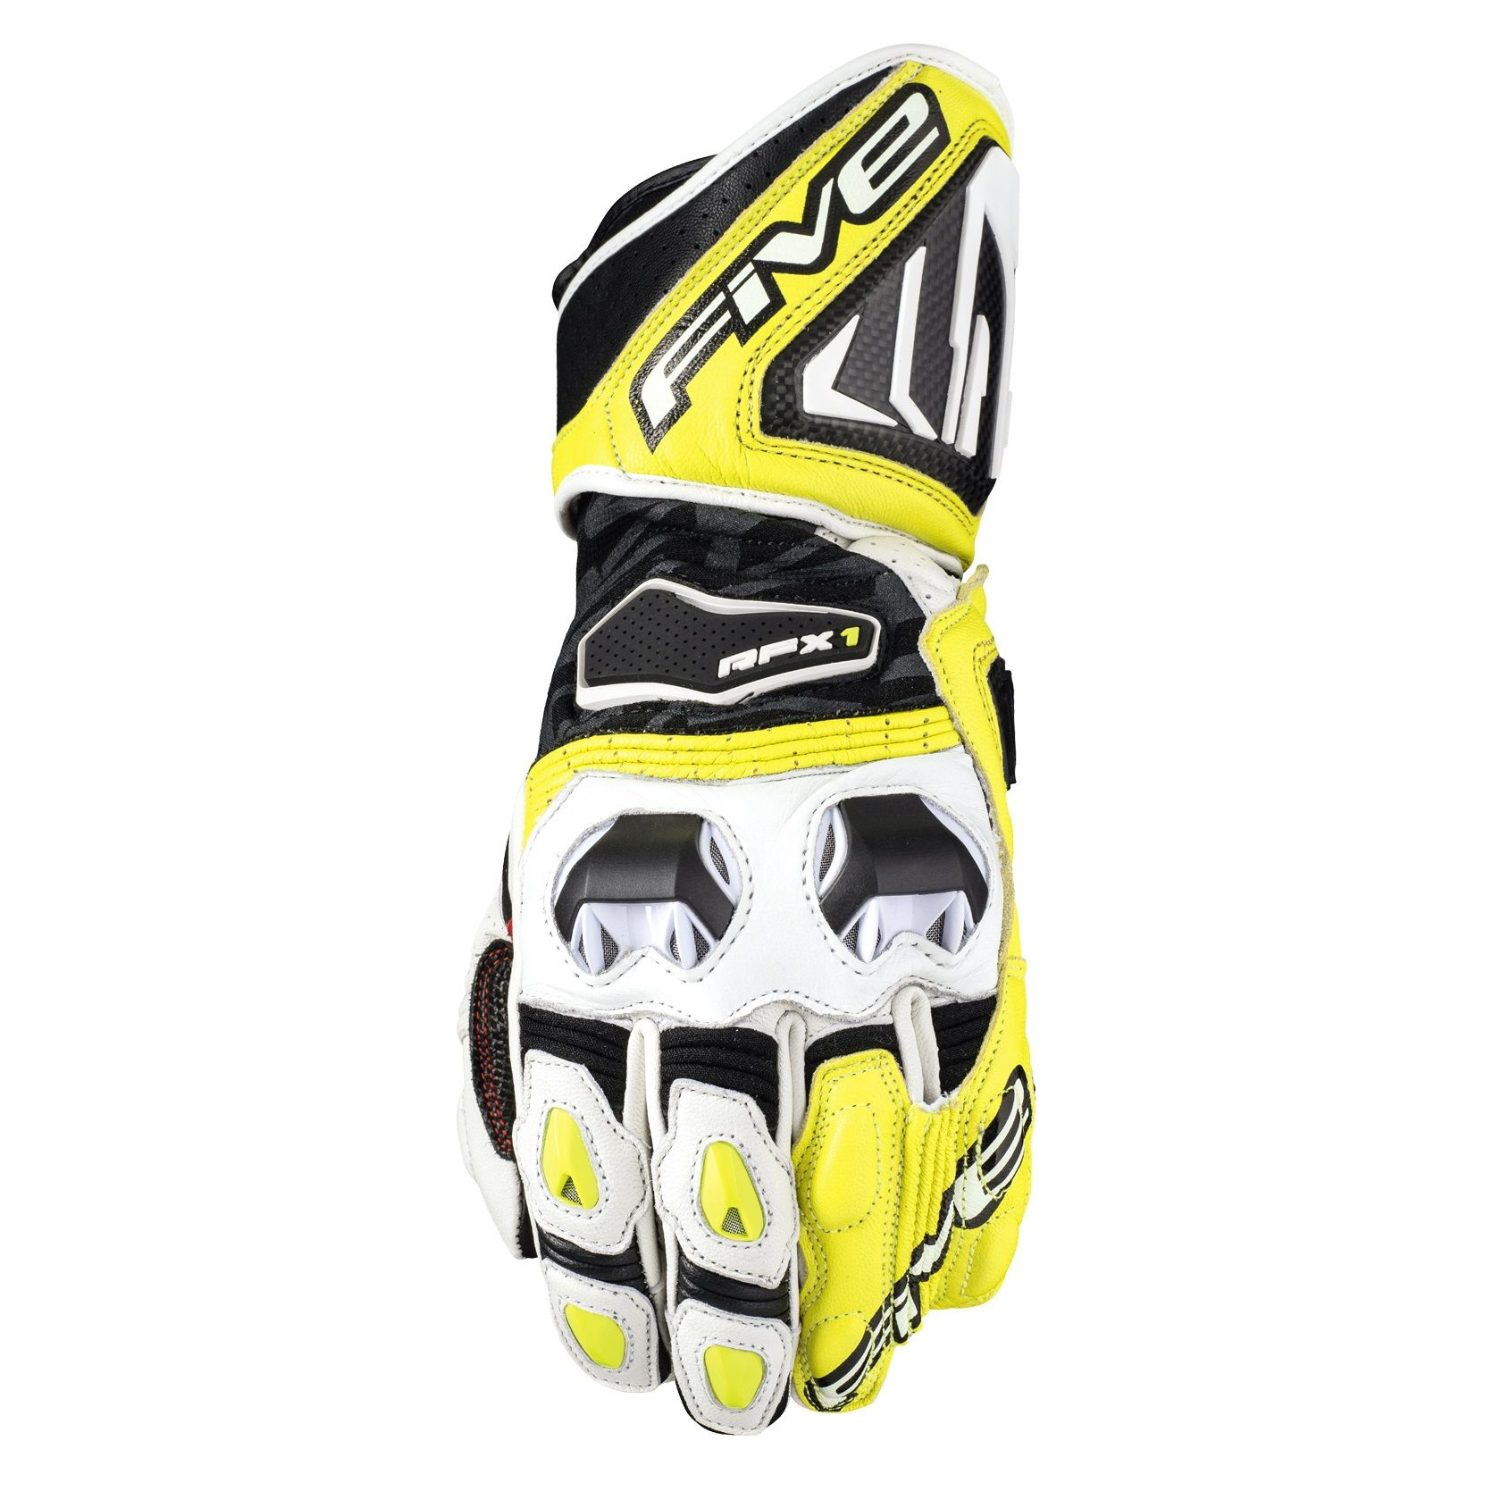 Image of EU Five RFX1 Gloves White Yellow Taille L